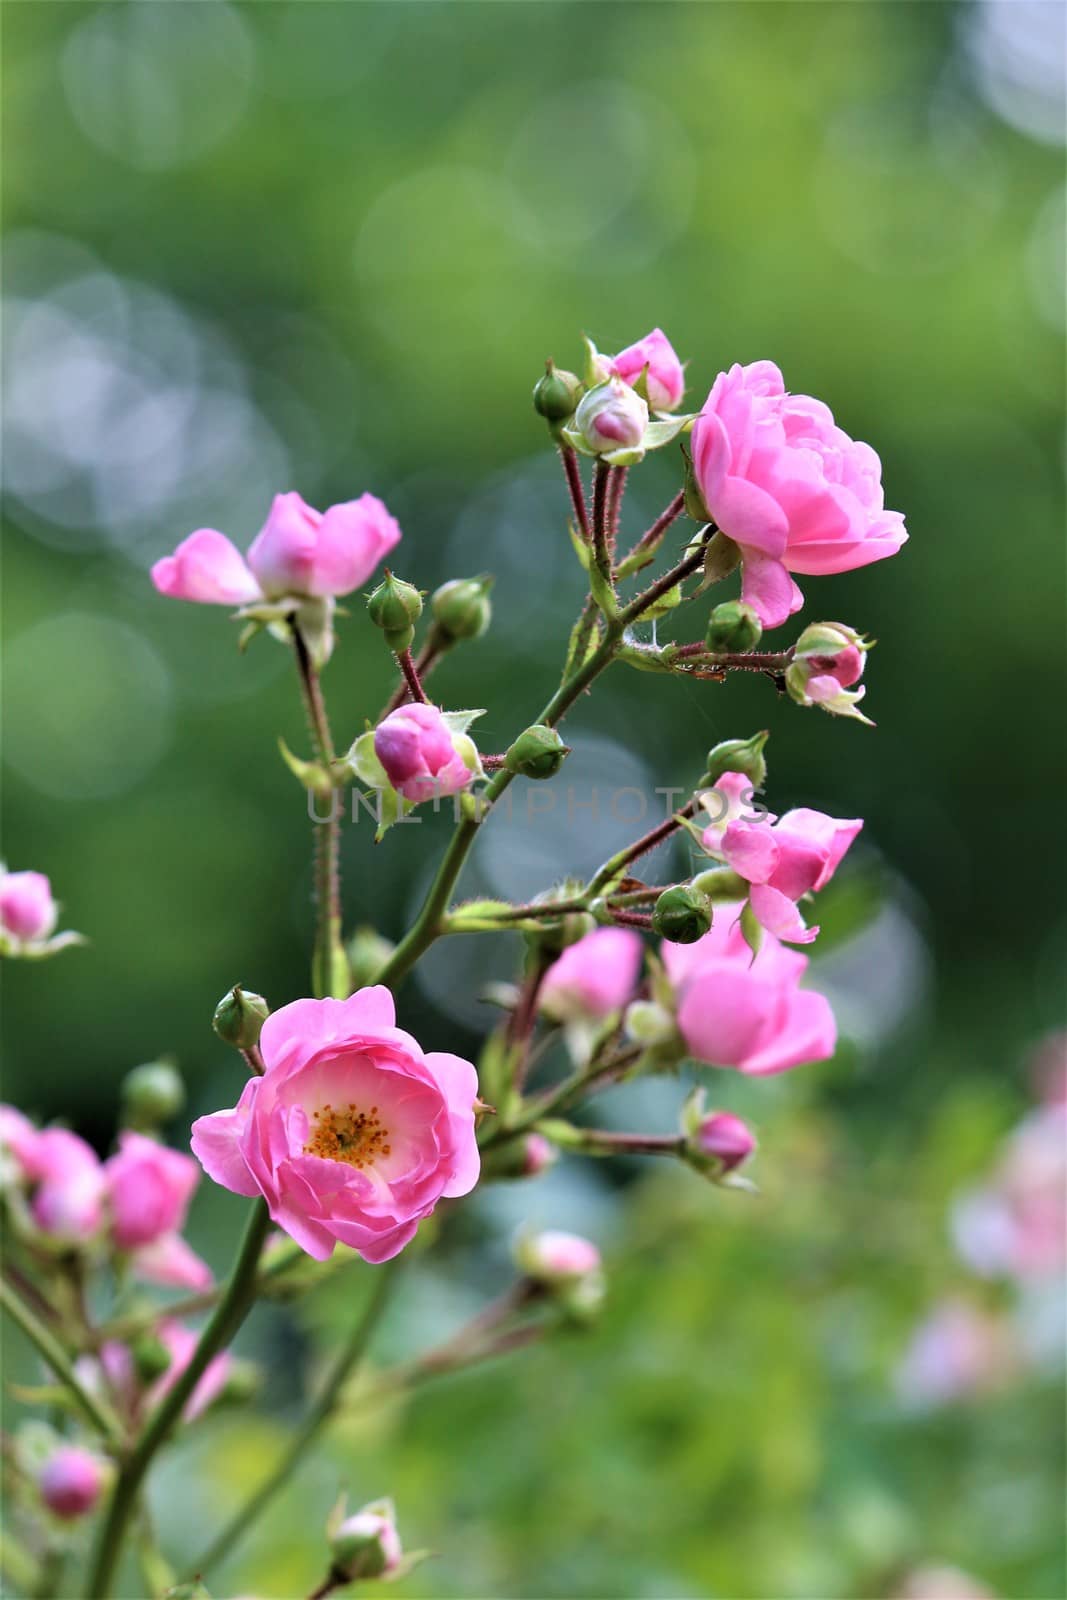 A pink shruh rose against a green background